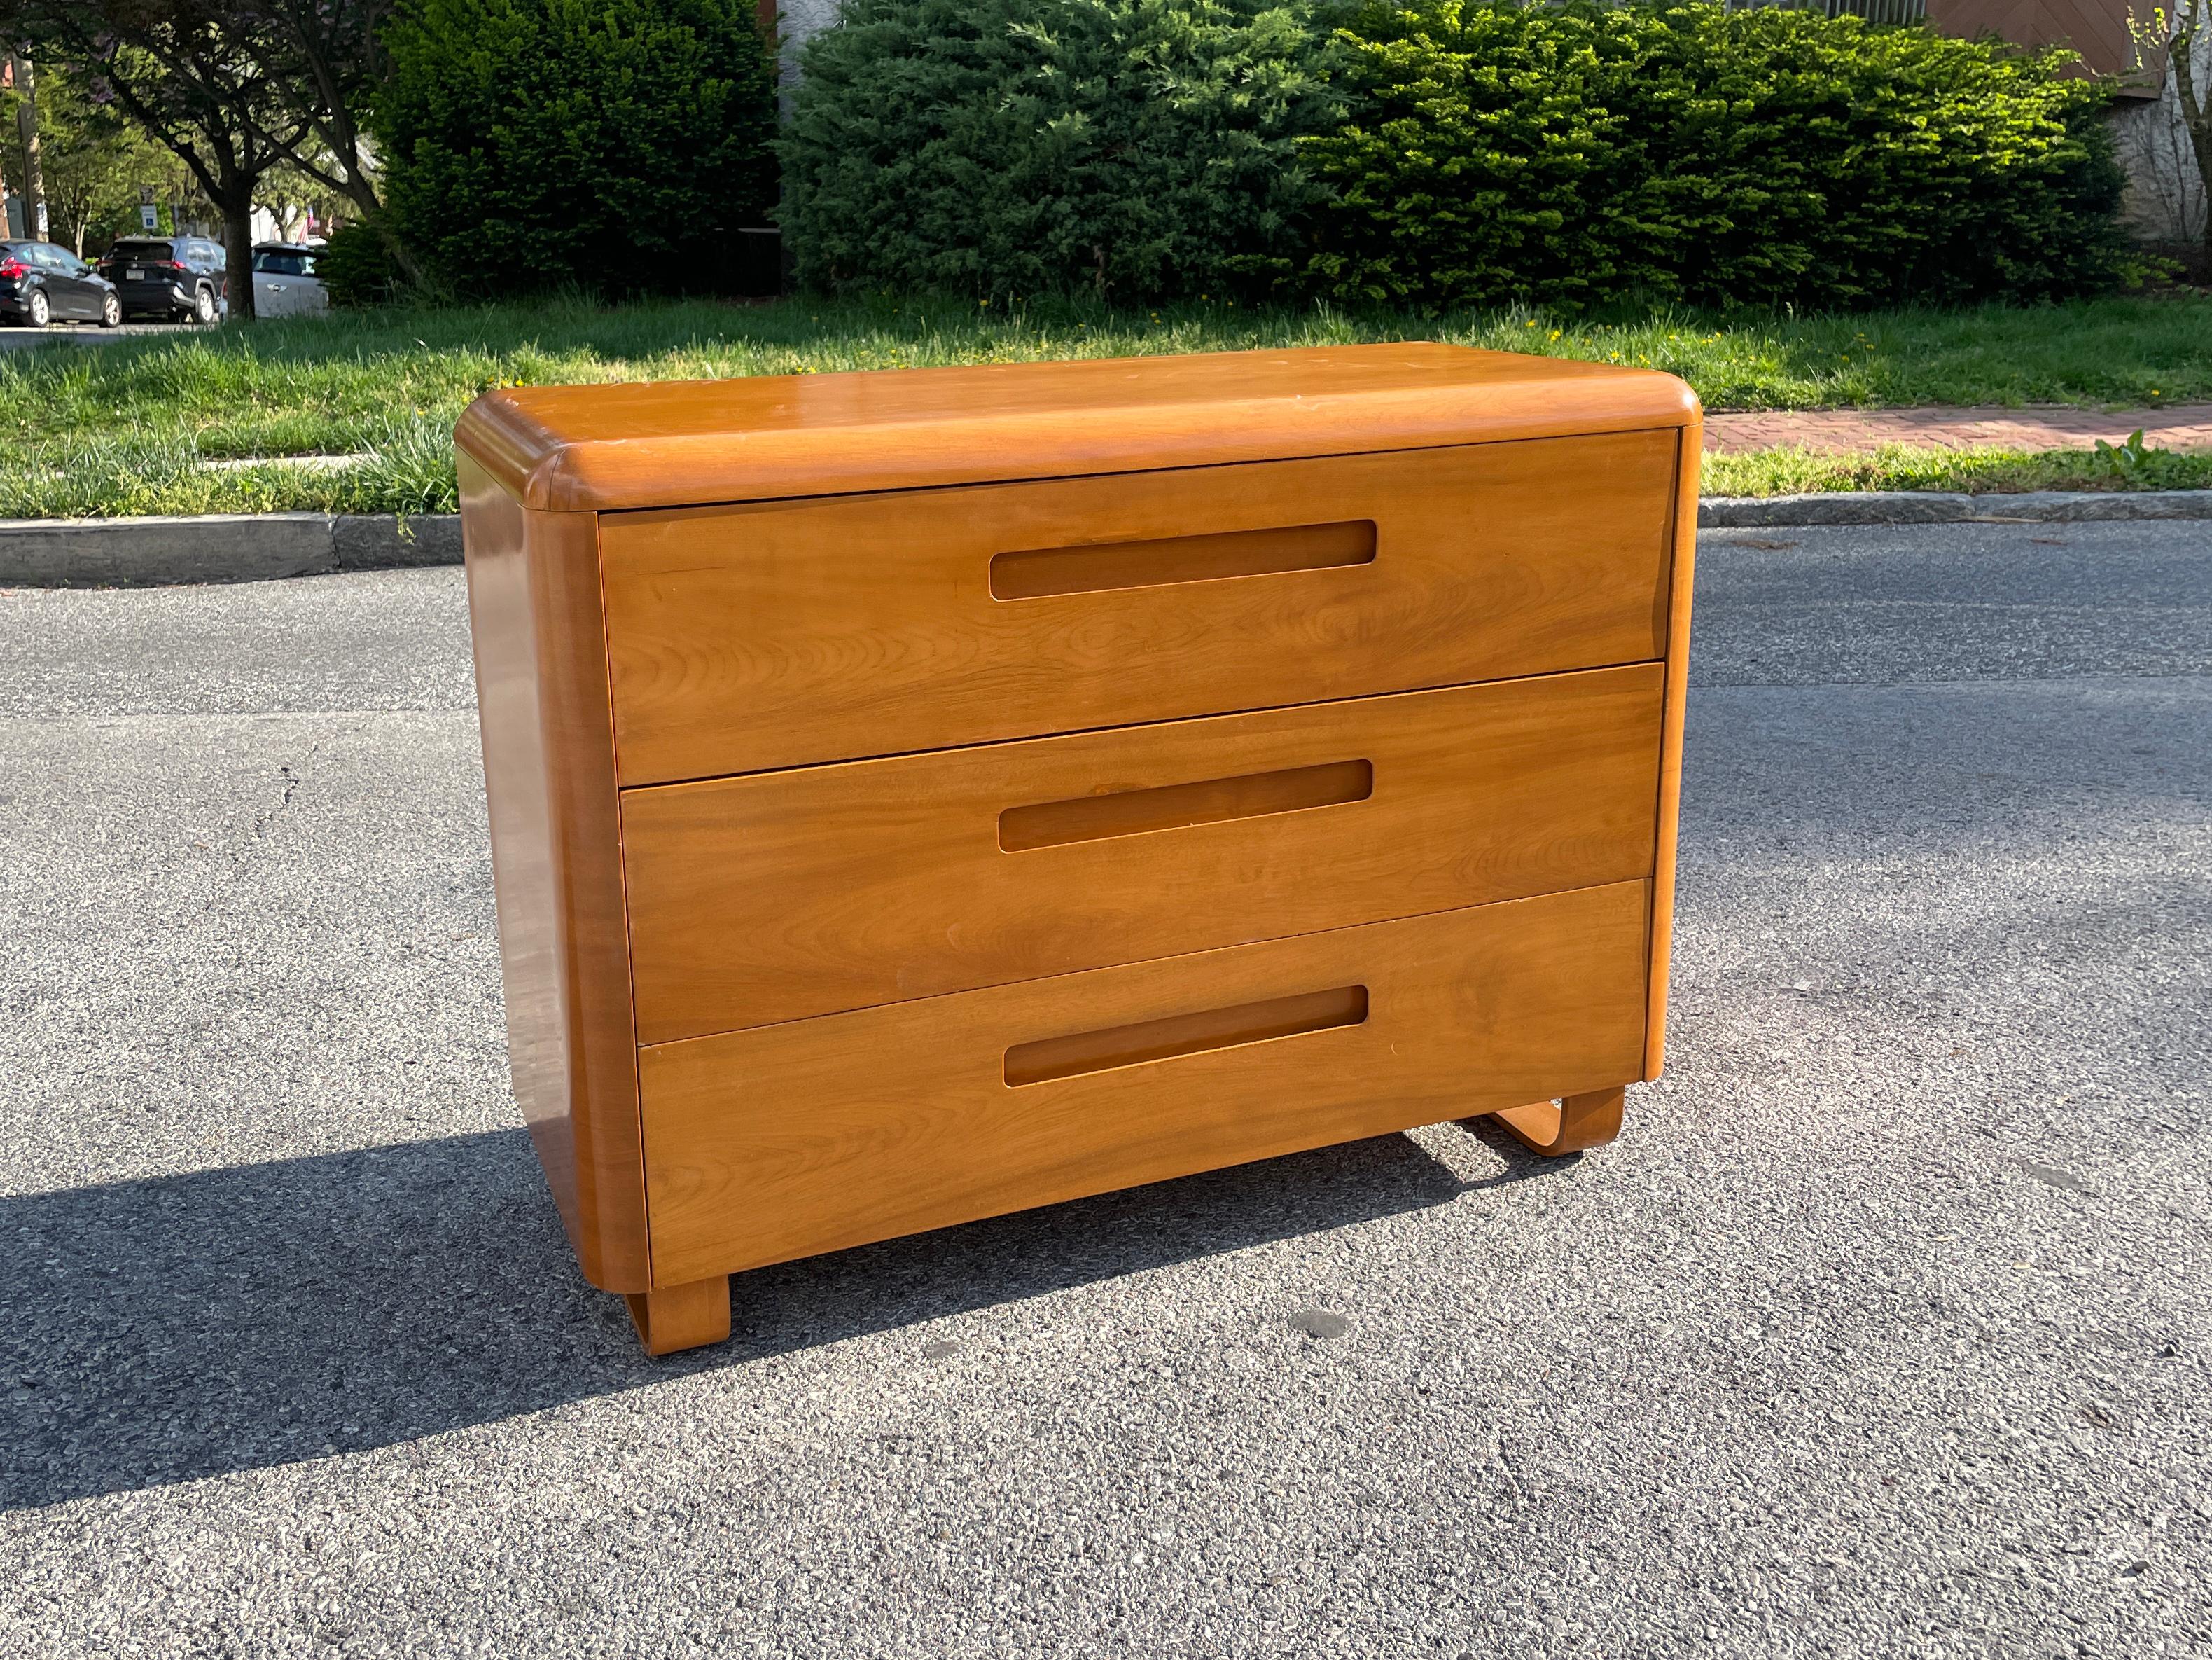 A beautiful mid-century three-drawer low dresser with bentwood legs designed by Paul Goldman for his 